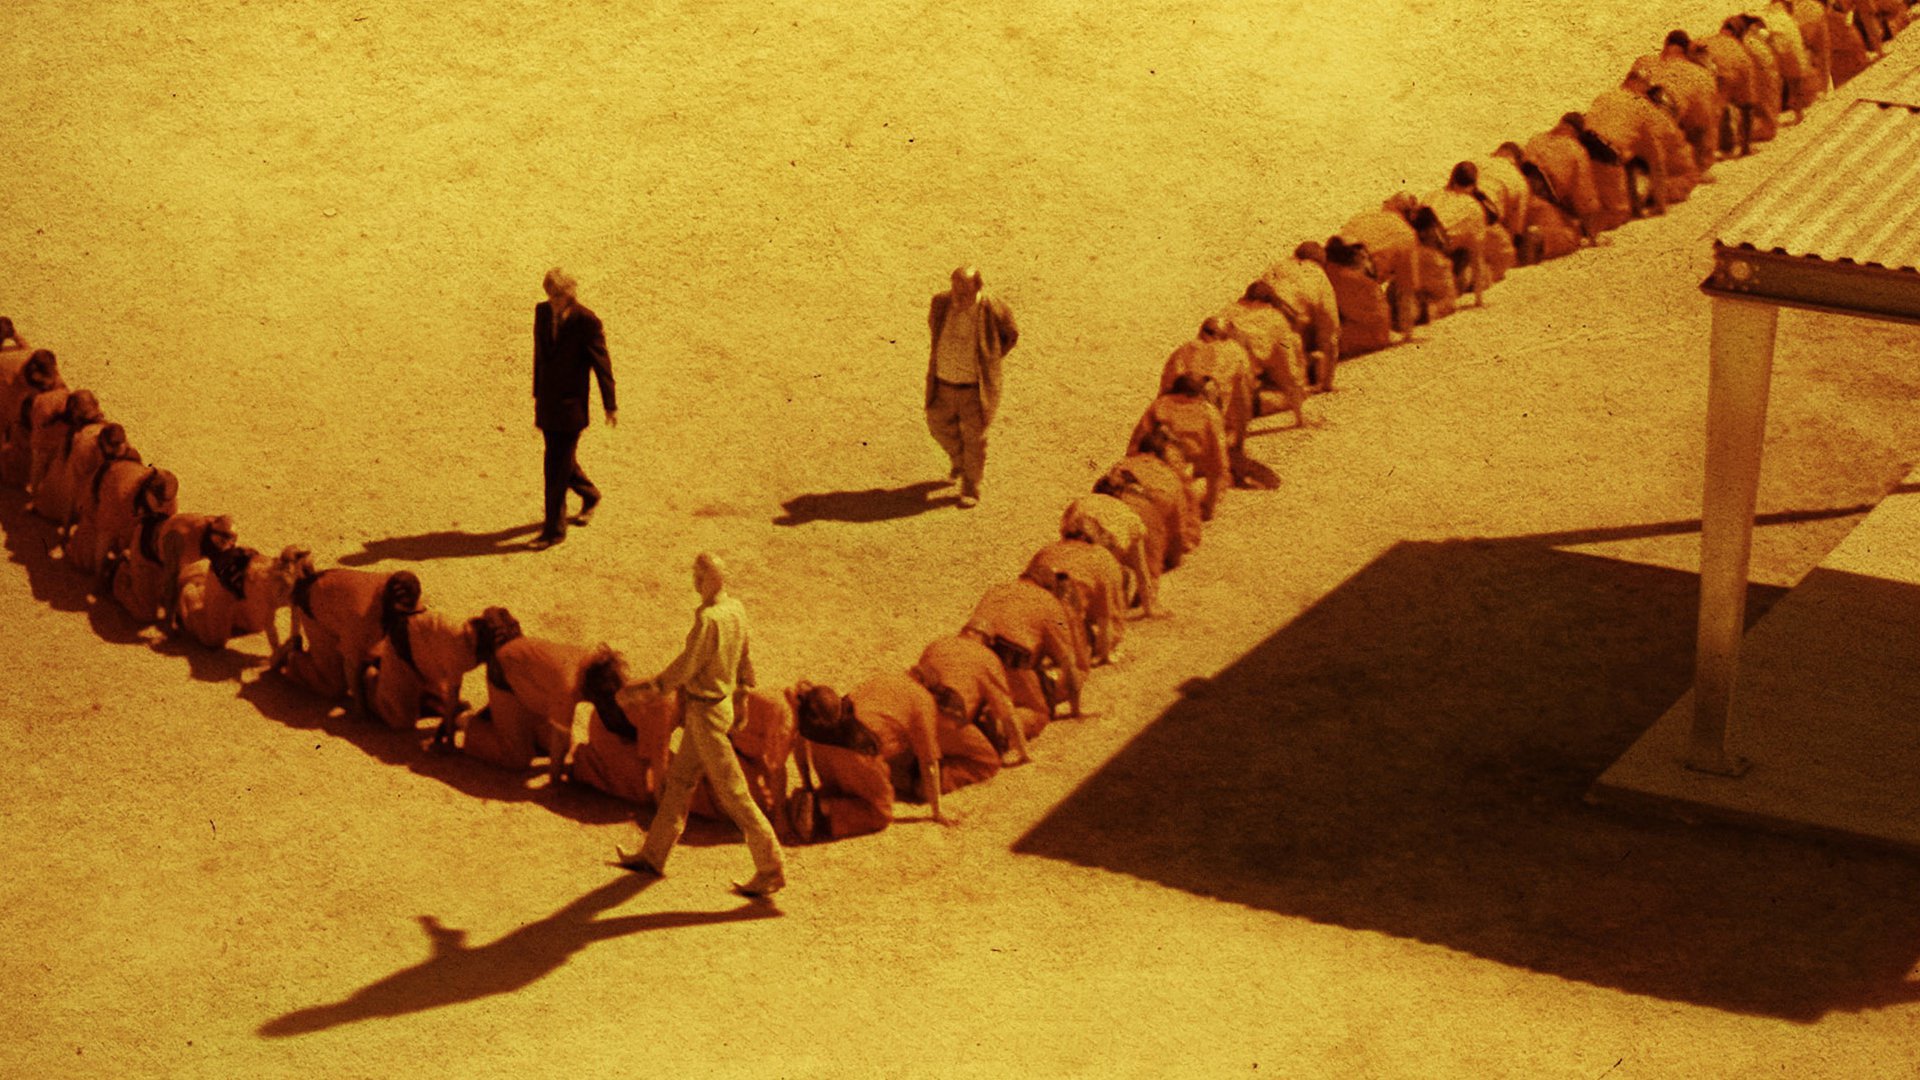 Review: THE HUMAN CENTIPEDE 3 (FINAL SEQUENCE)